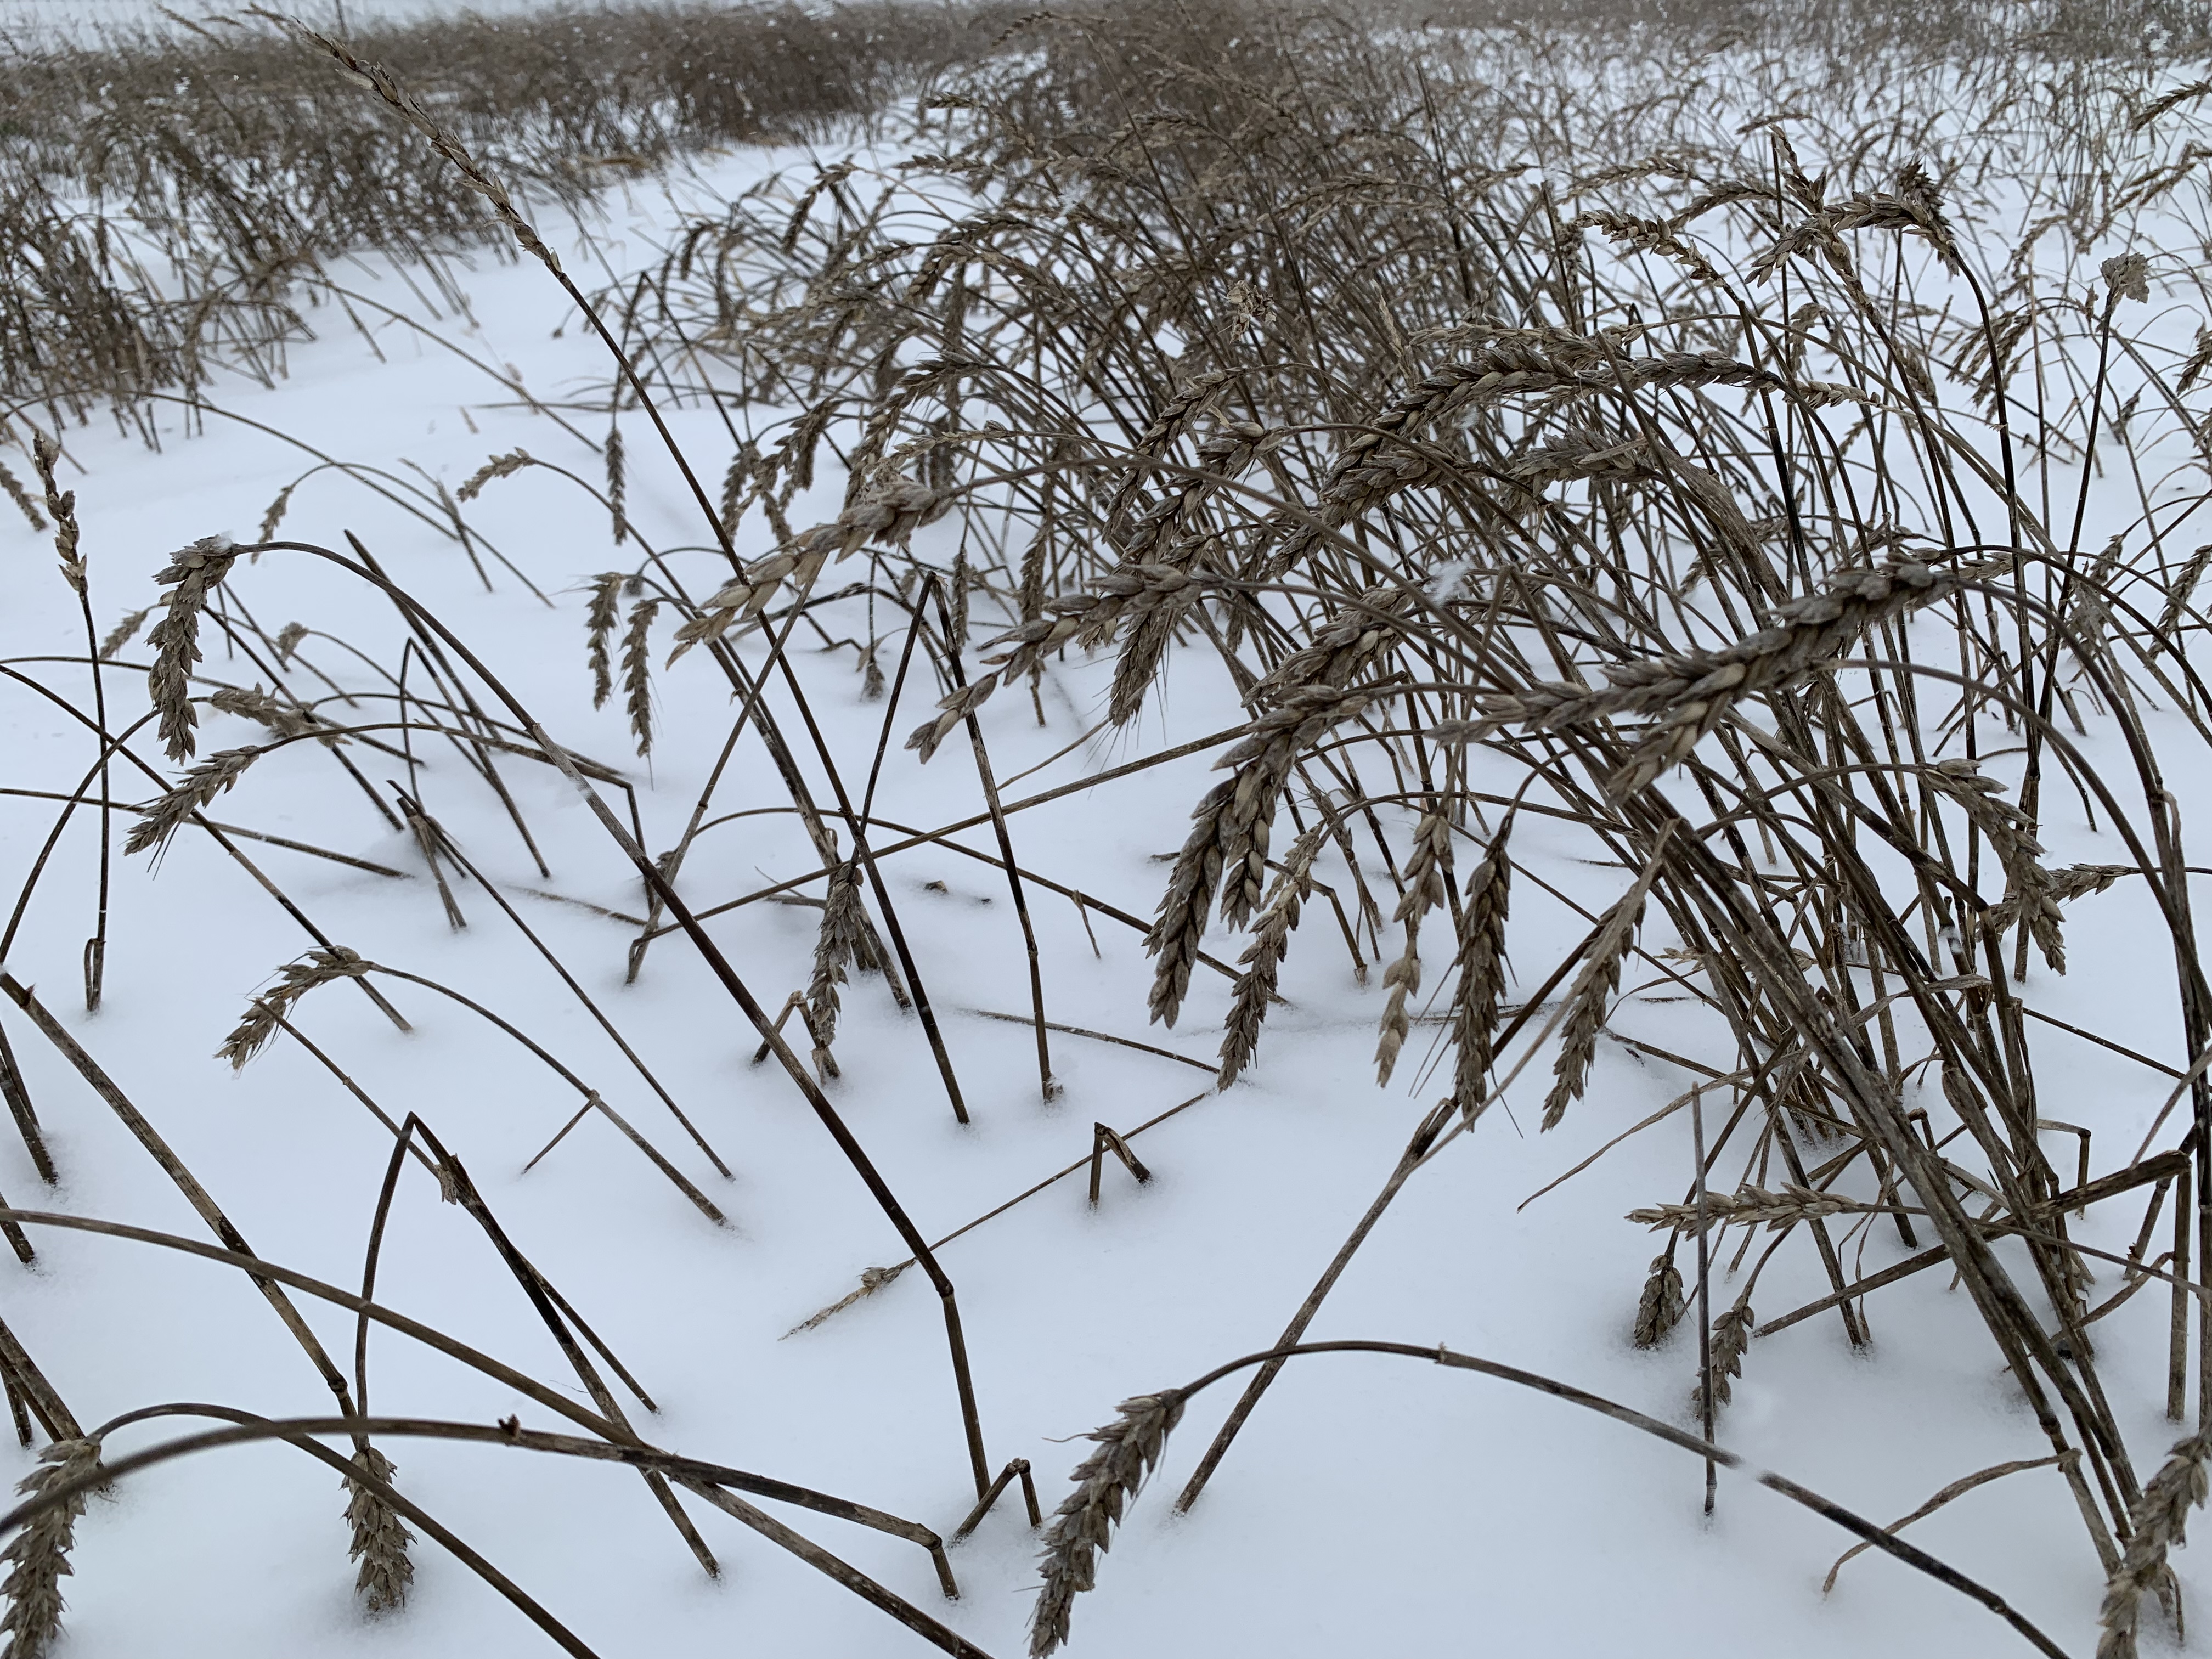 Snow has prevented wheat from being harvested in parts of North Dakota this fall. (NDSU photo)